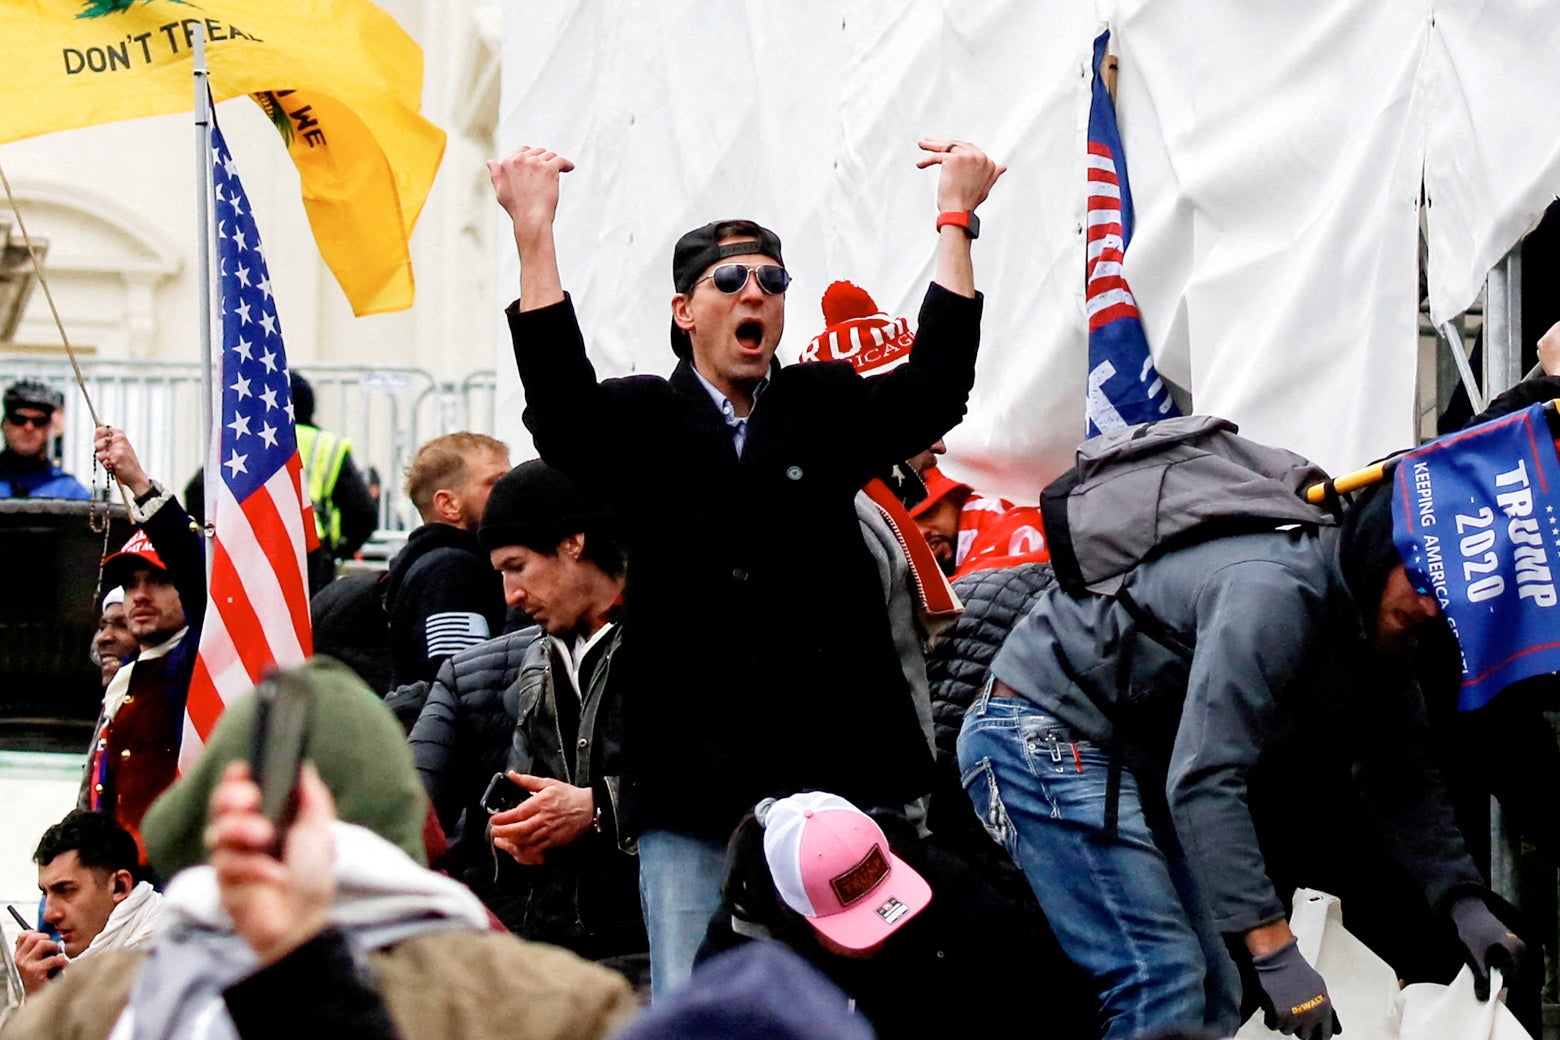 Kelley, wearing black sunglasses and a backward hat, makes a "come this way" gesture with two hands against a backdrop of other Jan. 6 rioters and white sheets over scaffolding.